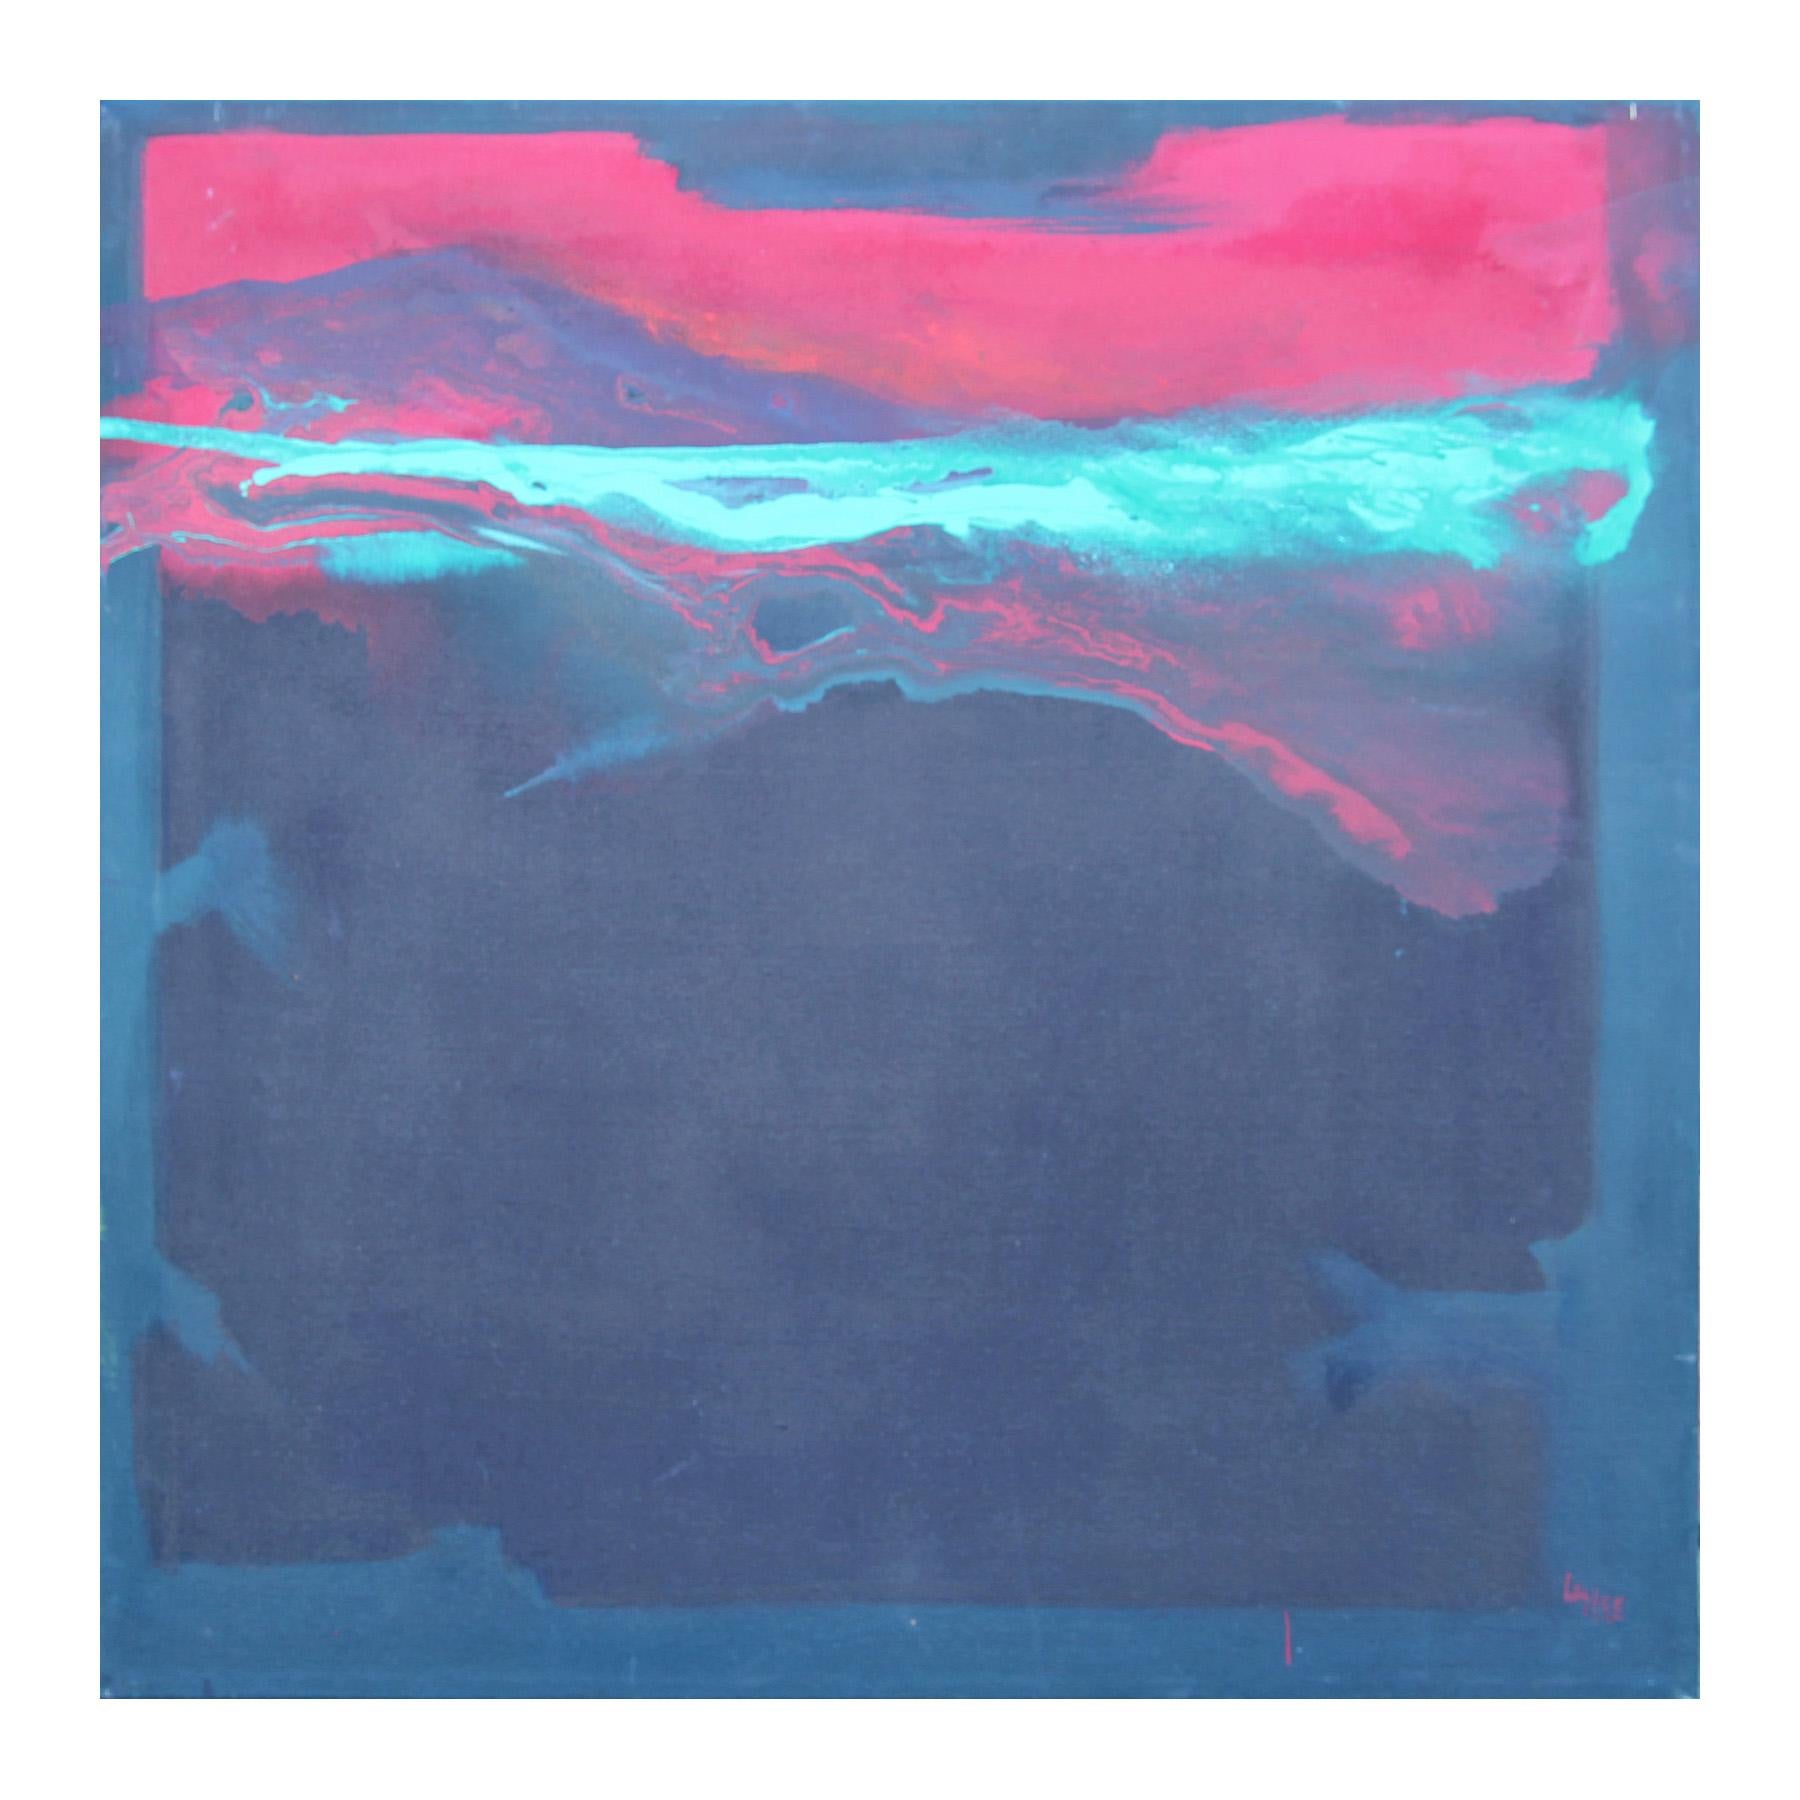 "Spirit Suite-Earthscape III” Pink, Aqua, & Navy Abstract Expressionist Painting